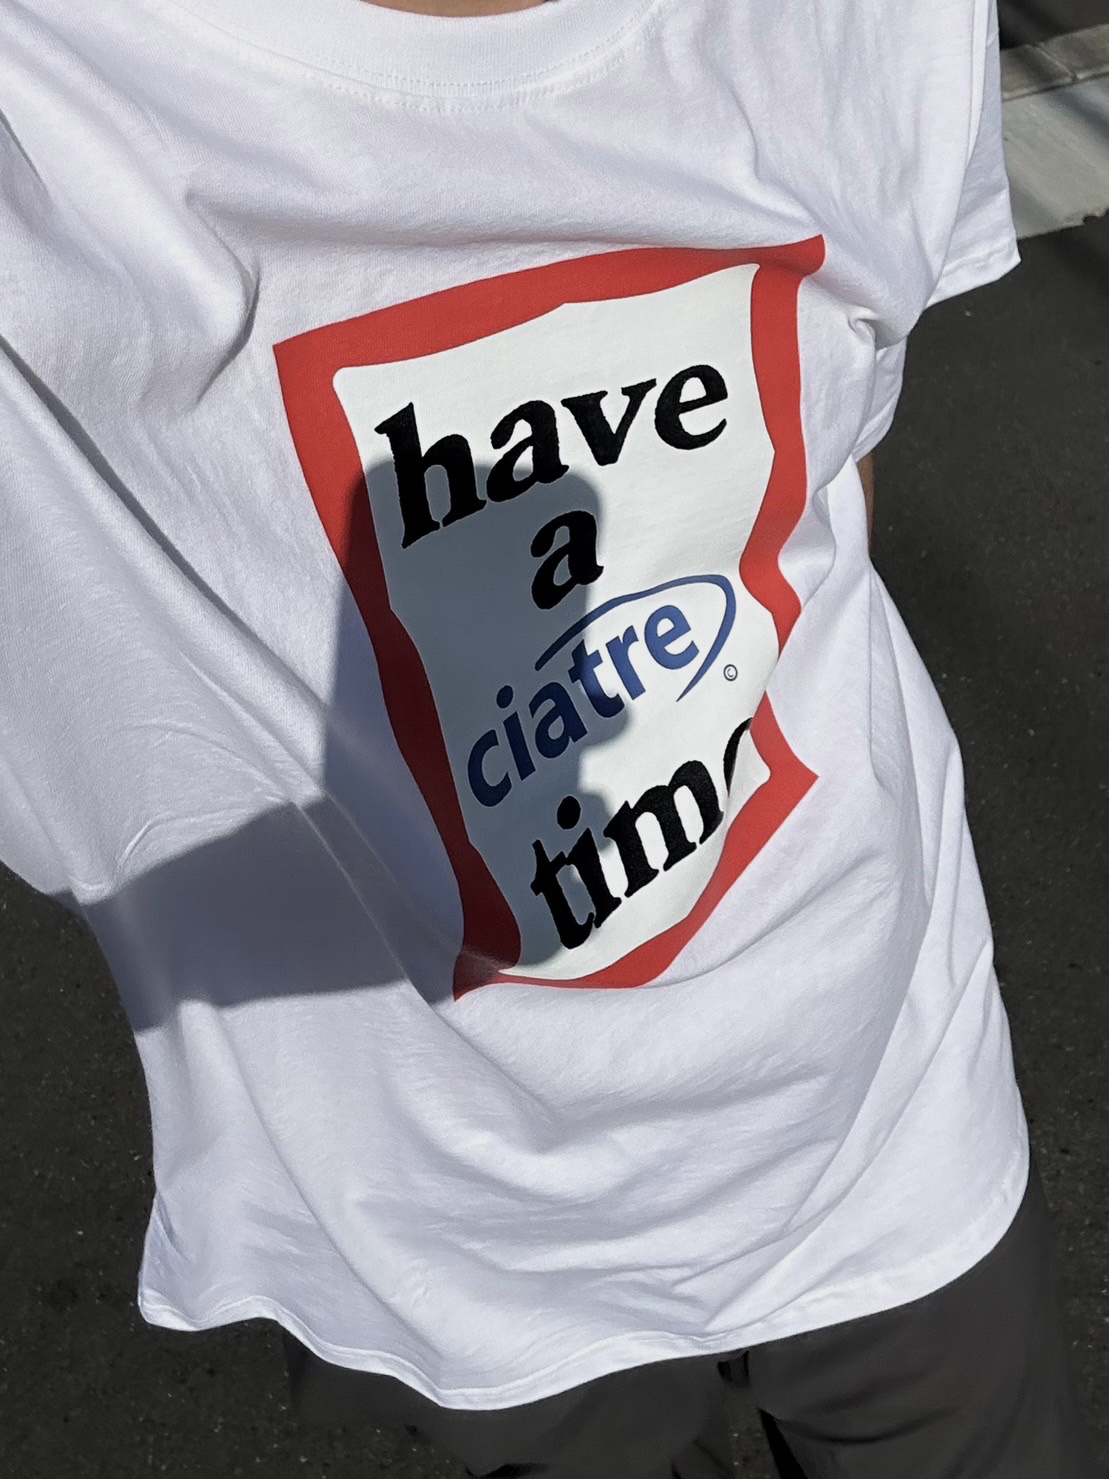 ciatre × have a good timeのコラボコレクション